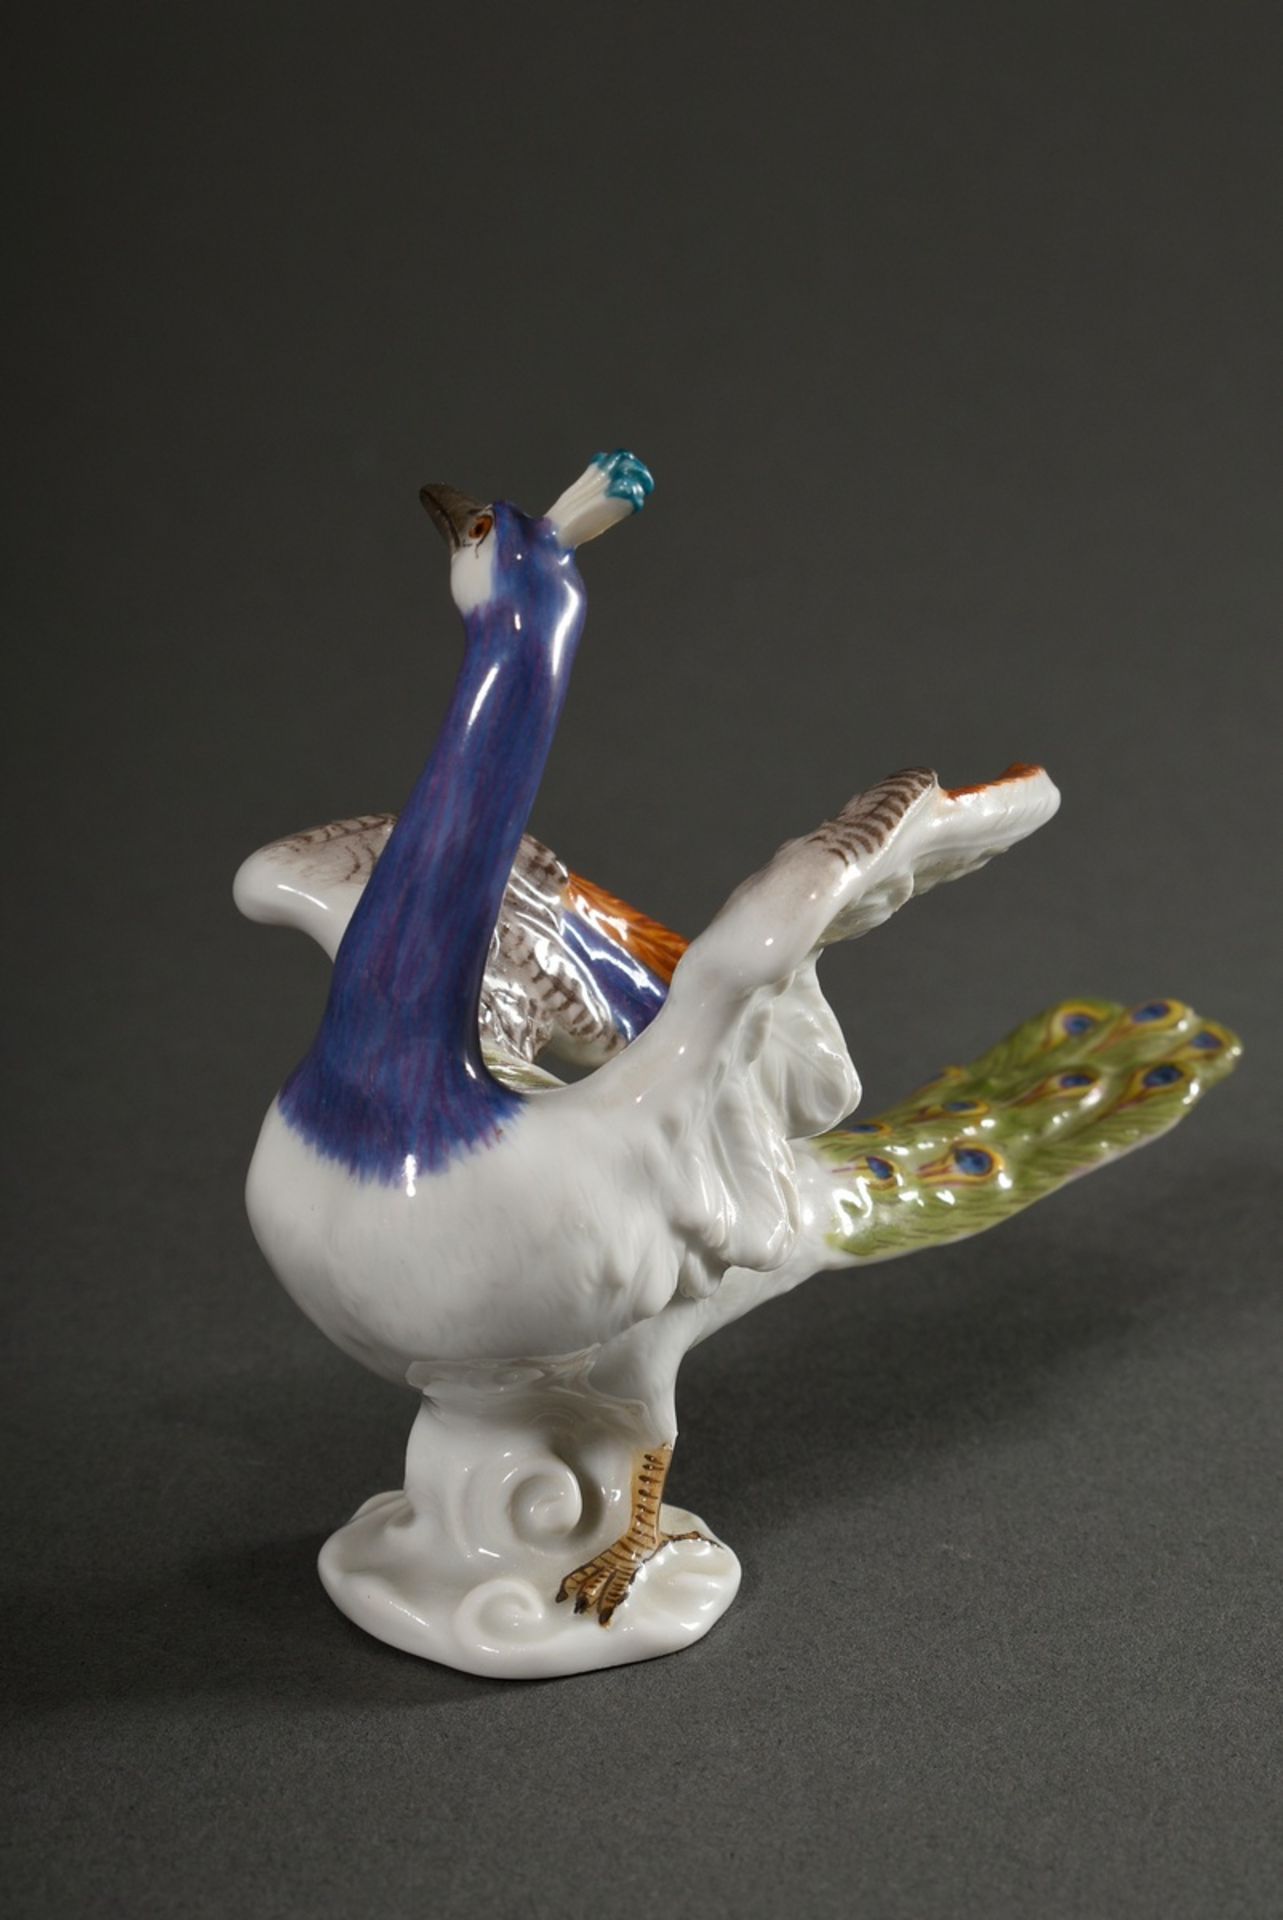 Small Meissen figure "Peacock", polychrome painted, model no.: 7719, form no.: 95, year: 1978, 9x11 - Image 4 of 8